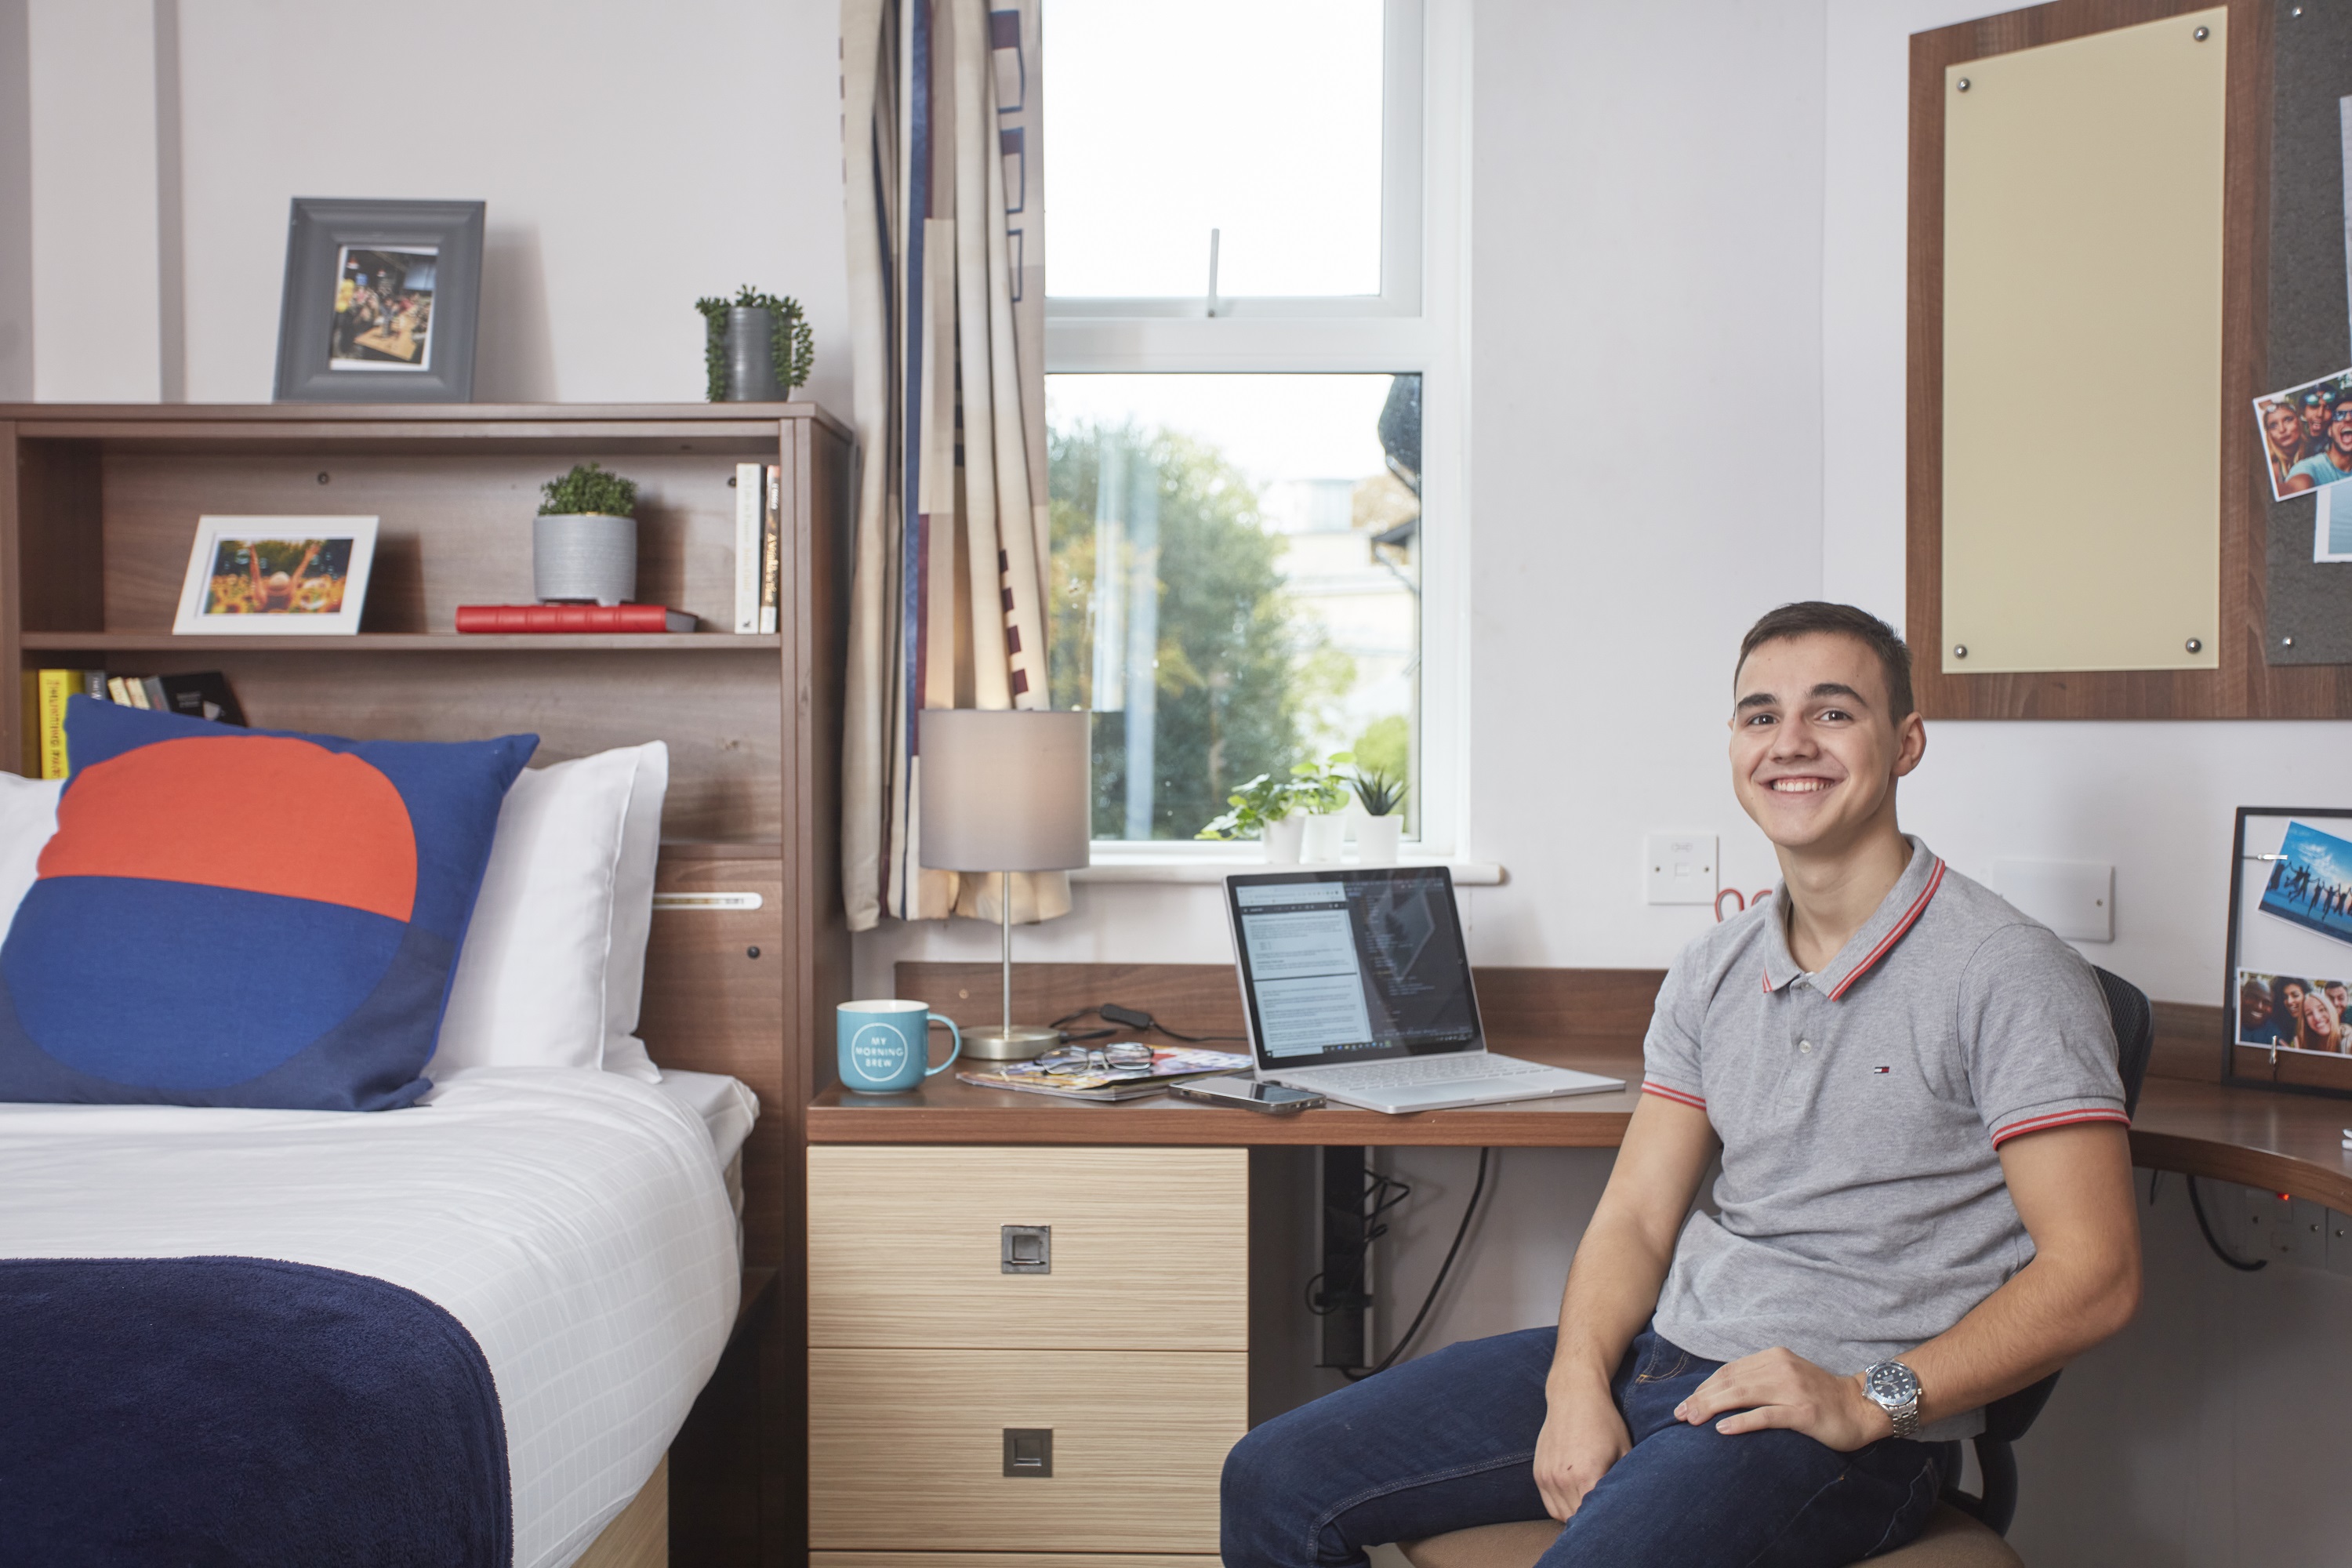 Student in accommodation smiling